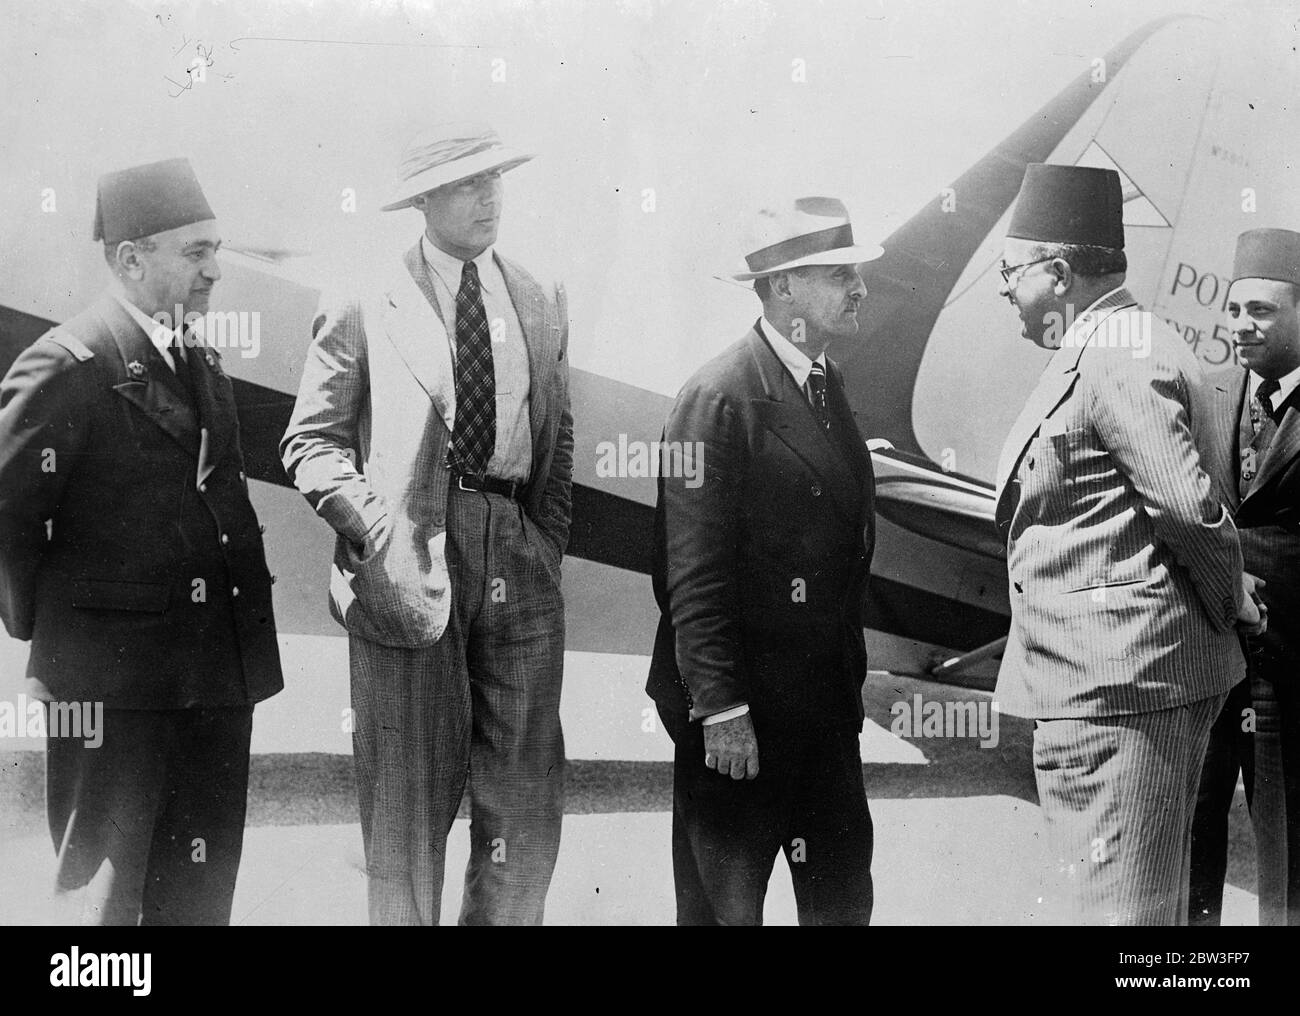 Romania ' s flying prince arrives in Cairo after flight from Bucharest . Making the flight in his private plane Prince George Bibesco of Romania arrived in Cairo from Bucharest , accompaniedby Prince Contacuzens . Prince Bibesco is well known in aeronautical circles throughout the world . Photo shows , Prince George Bibesco ( right soft hat ) , Prince Contecuzene welcomed on arrival at Cairo . 31 March 1936 Stock Photo